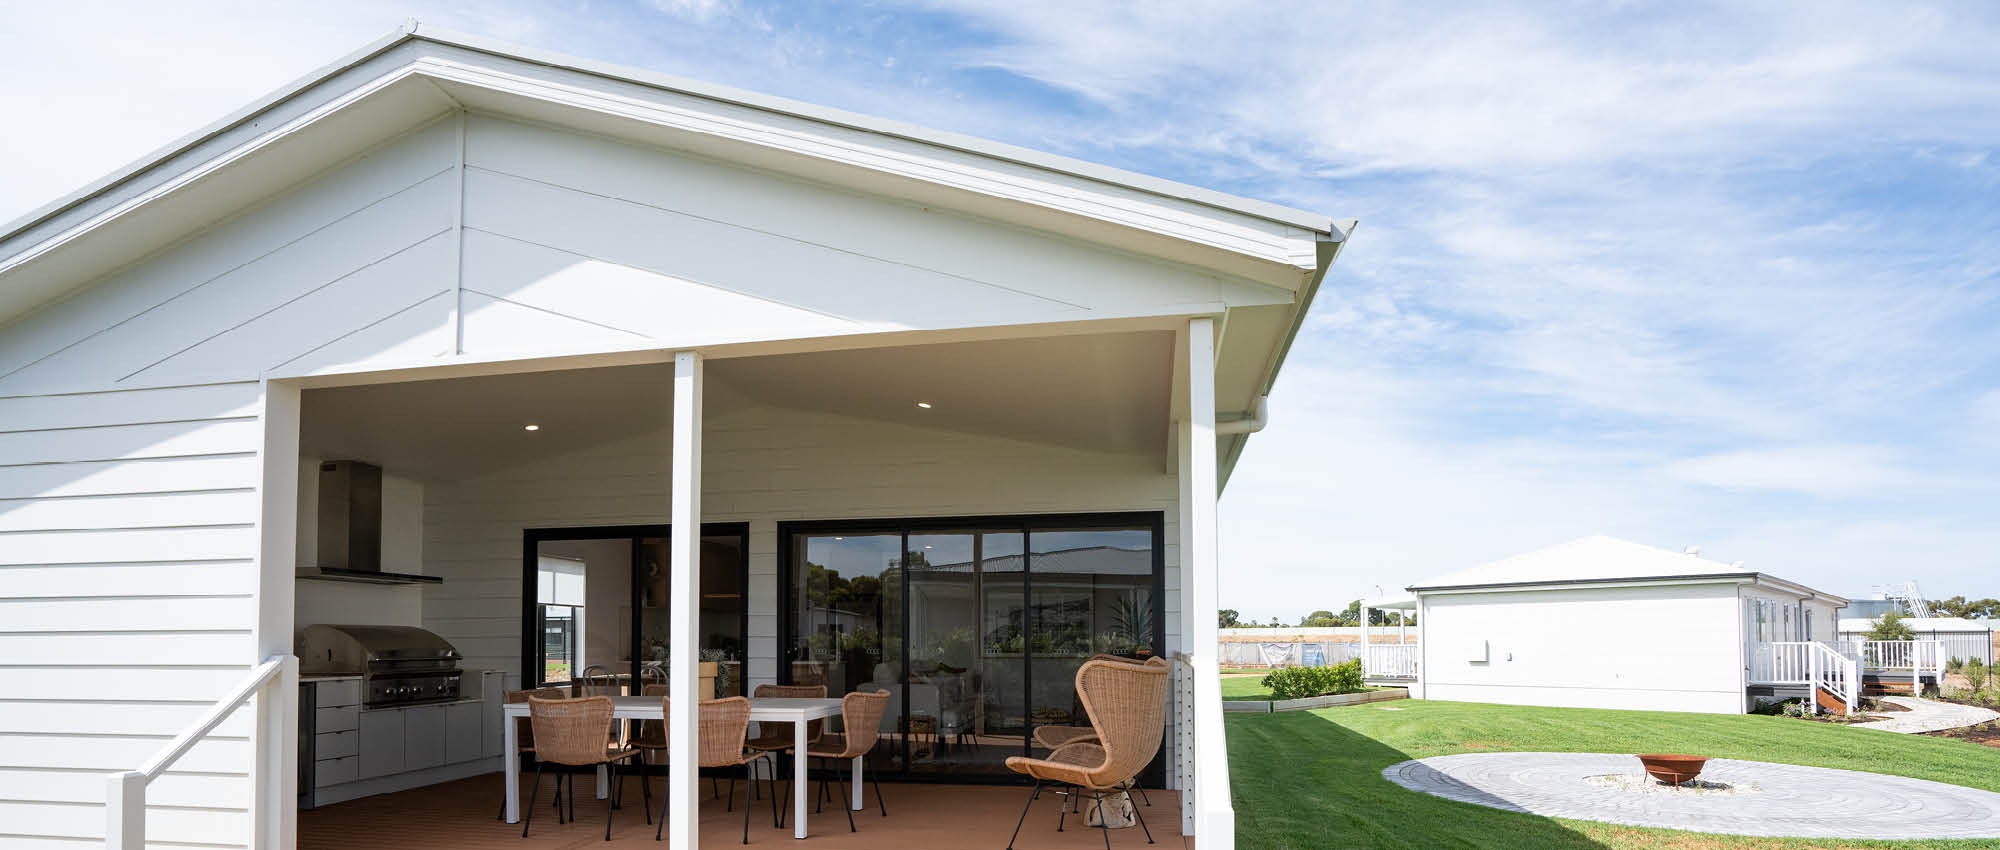 Roof types like hipped, flat, skillion and barn roof styles for your modular home.